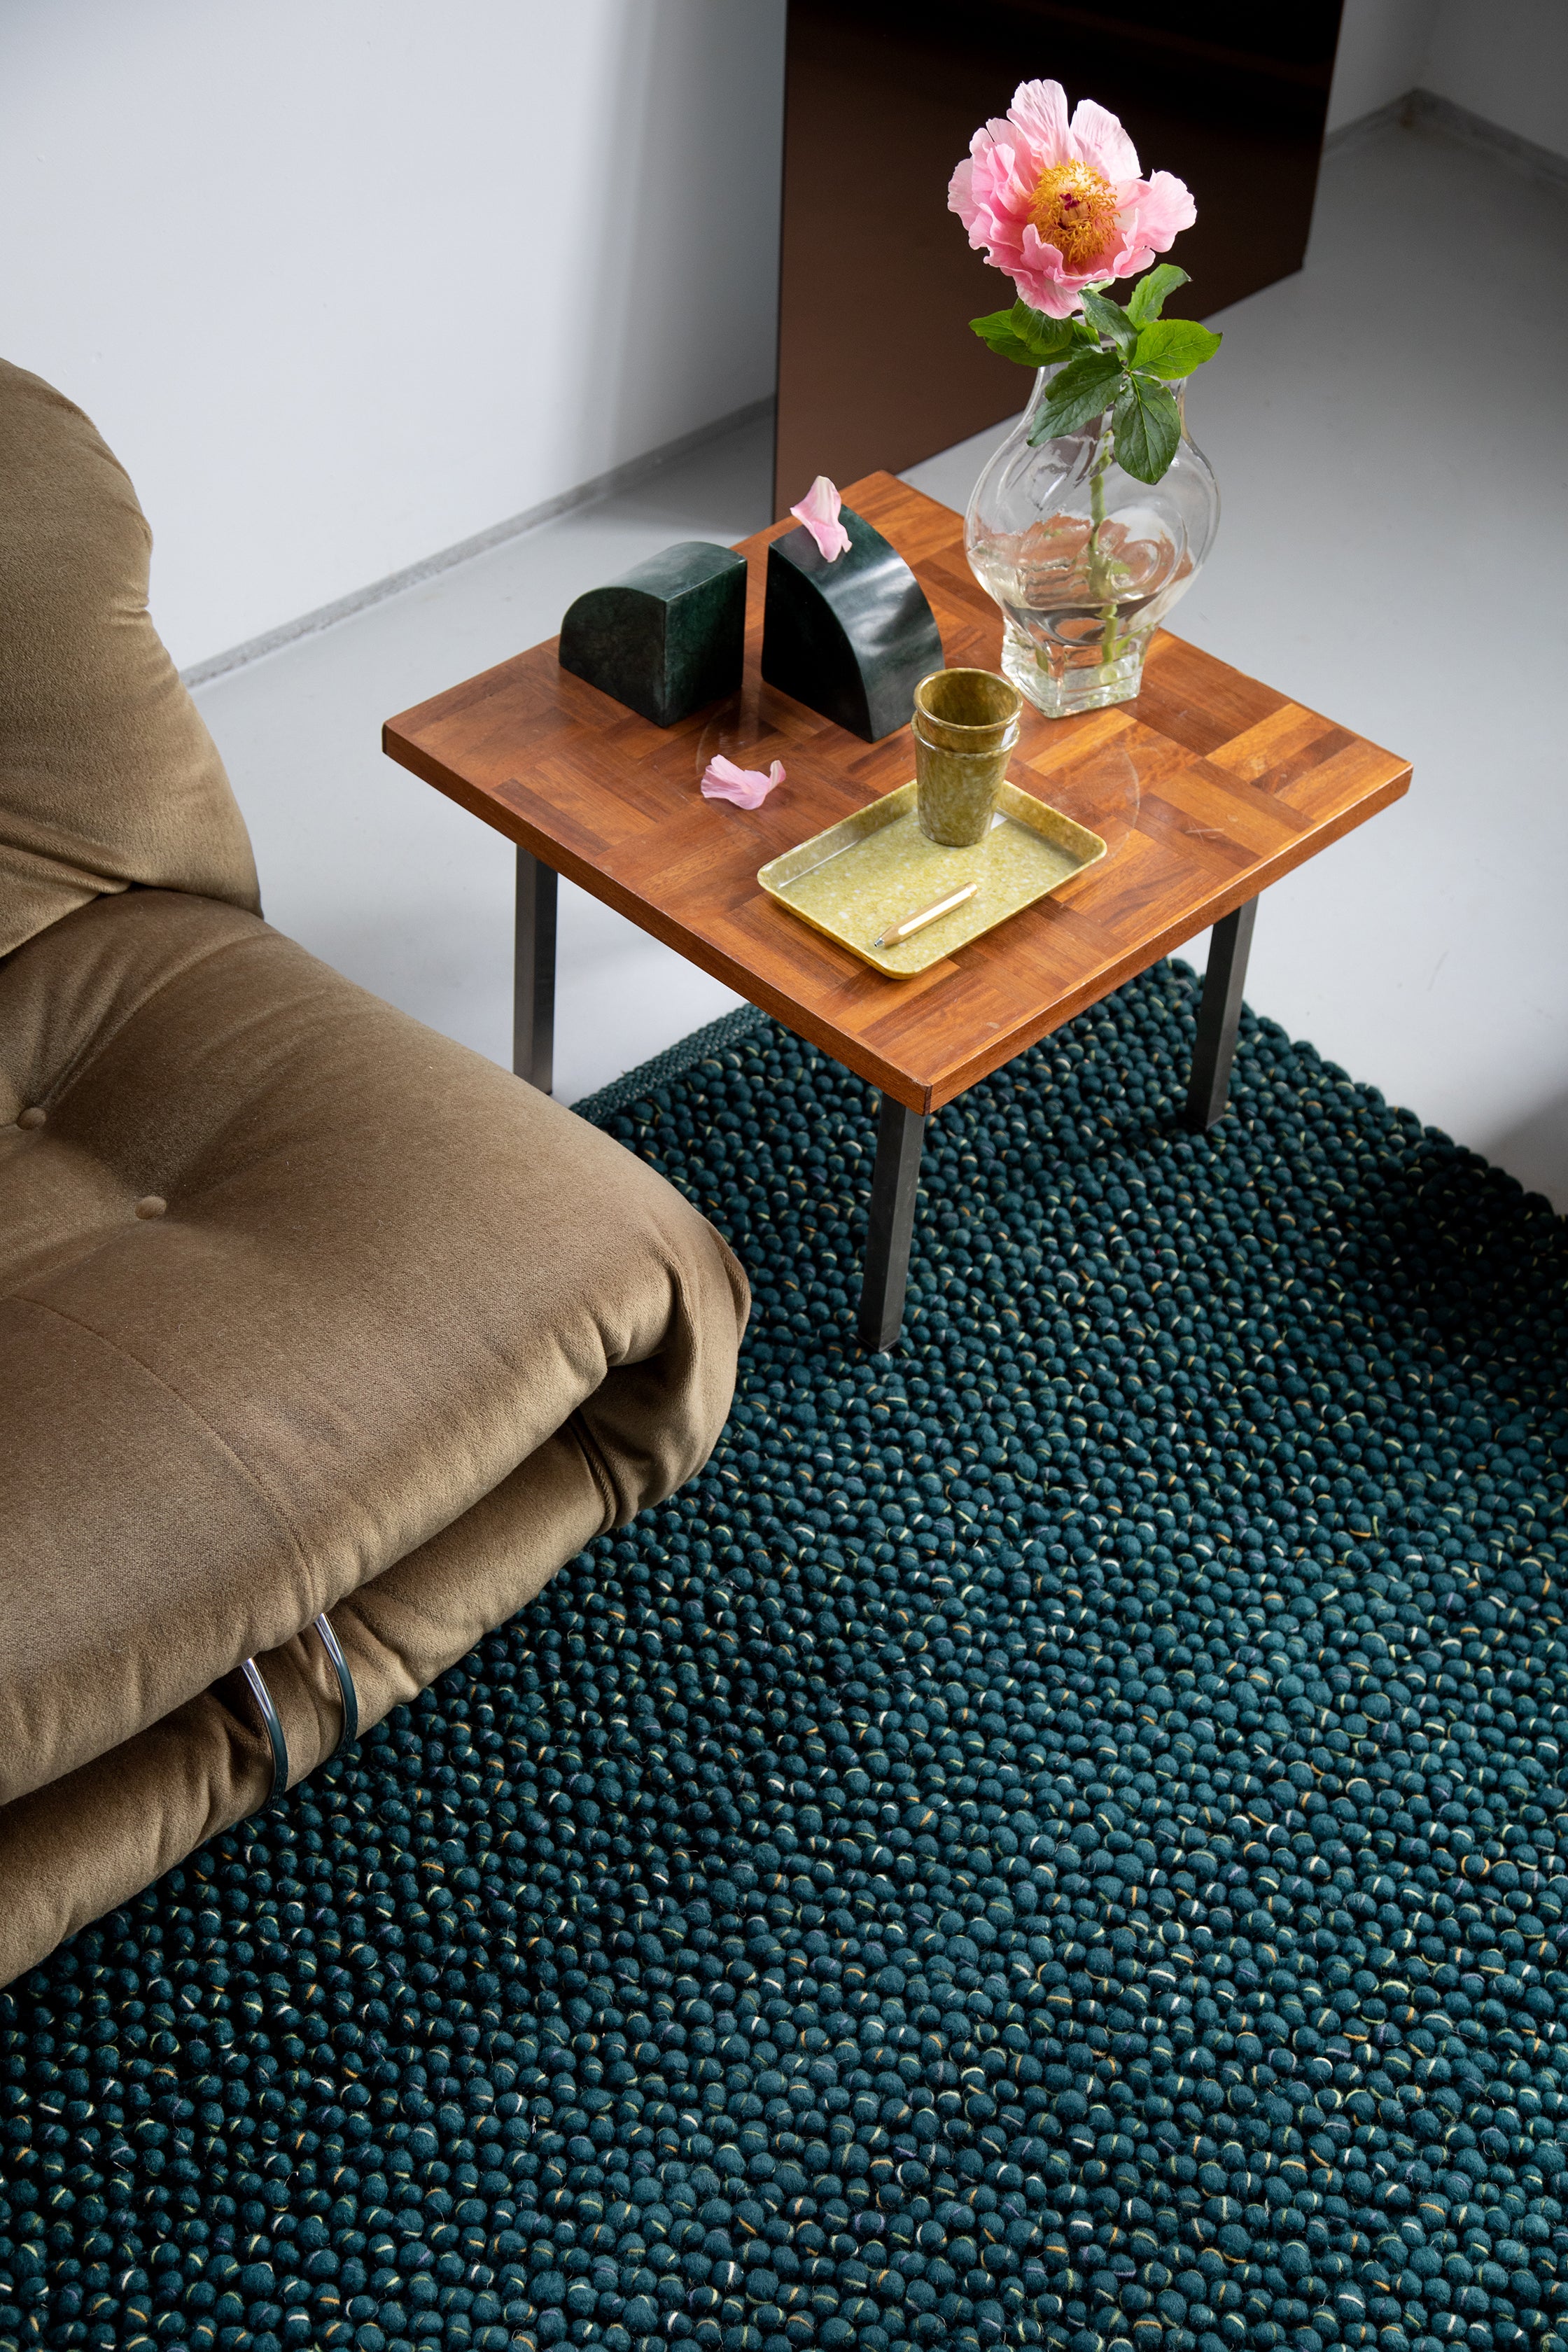 brink and campman green textured wool and jute rug